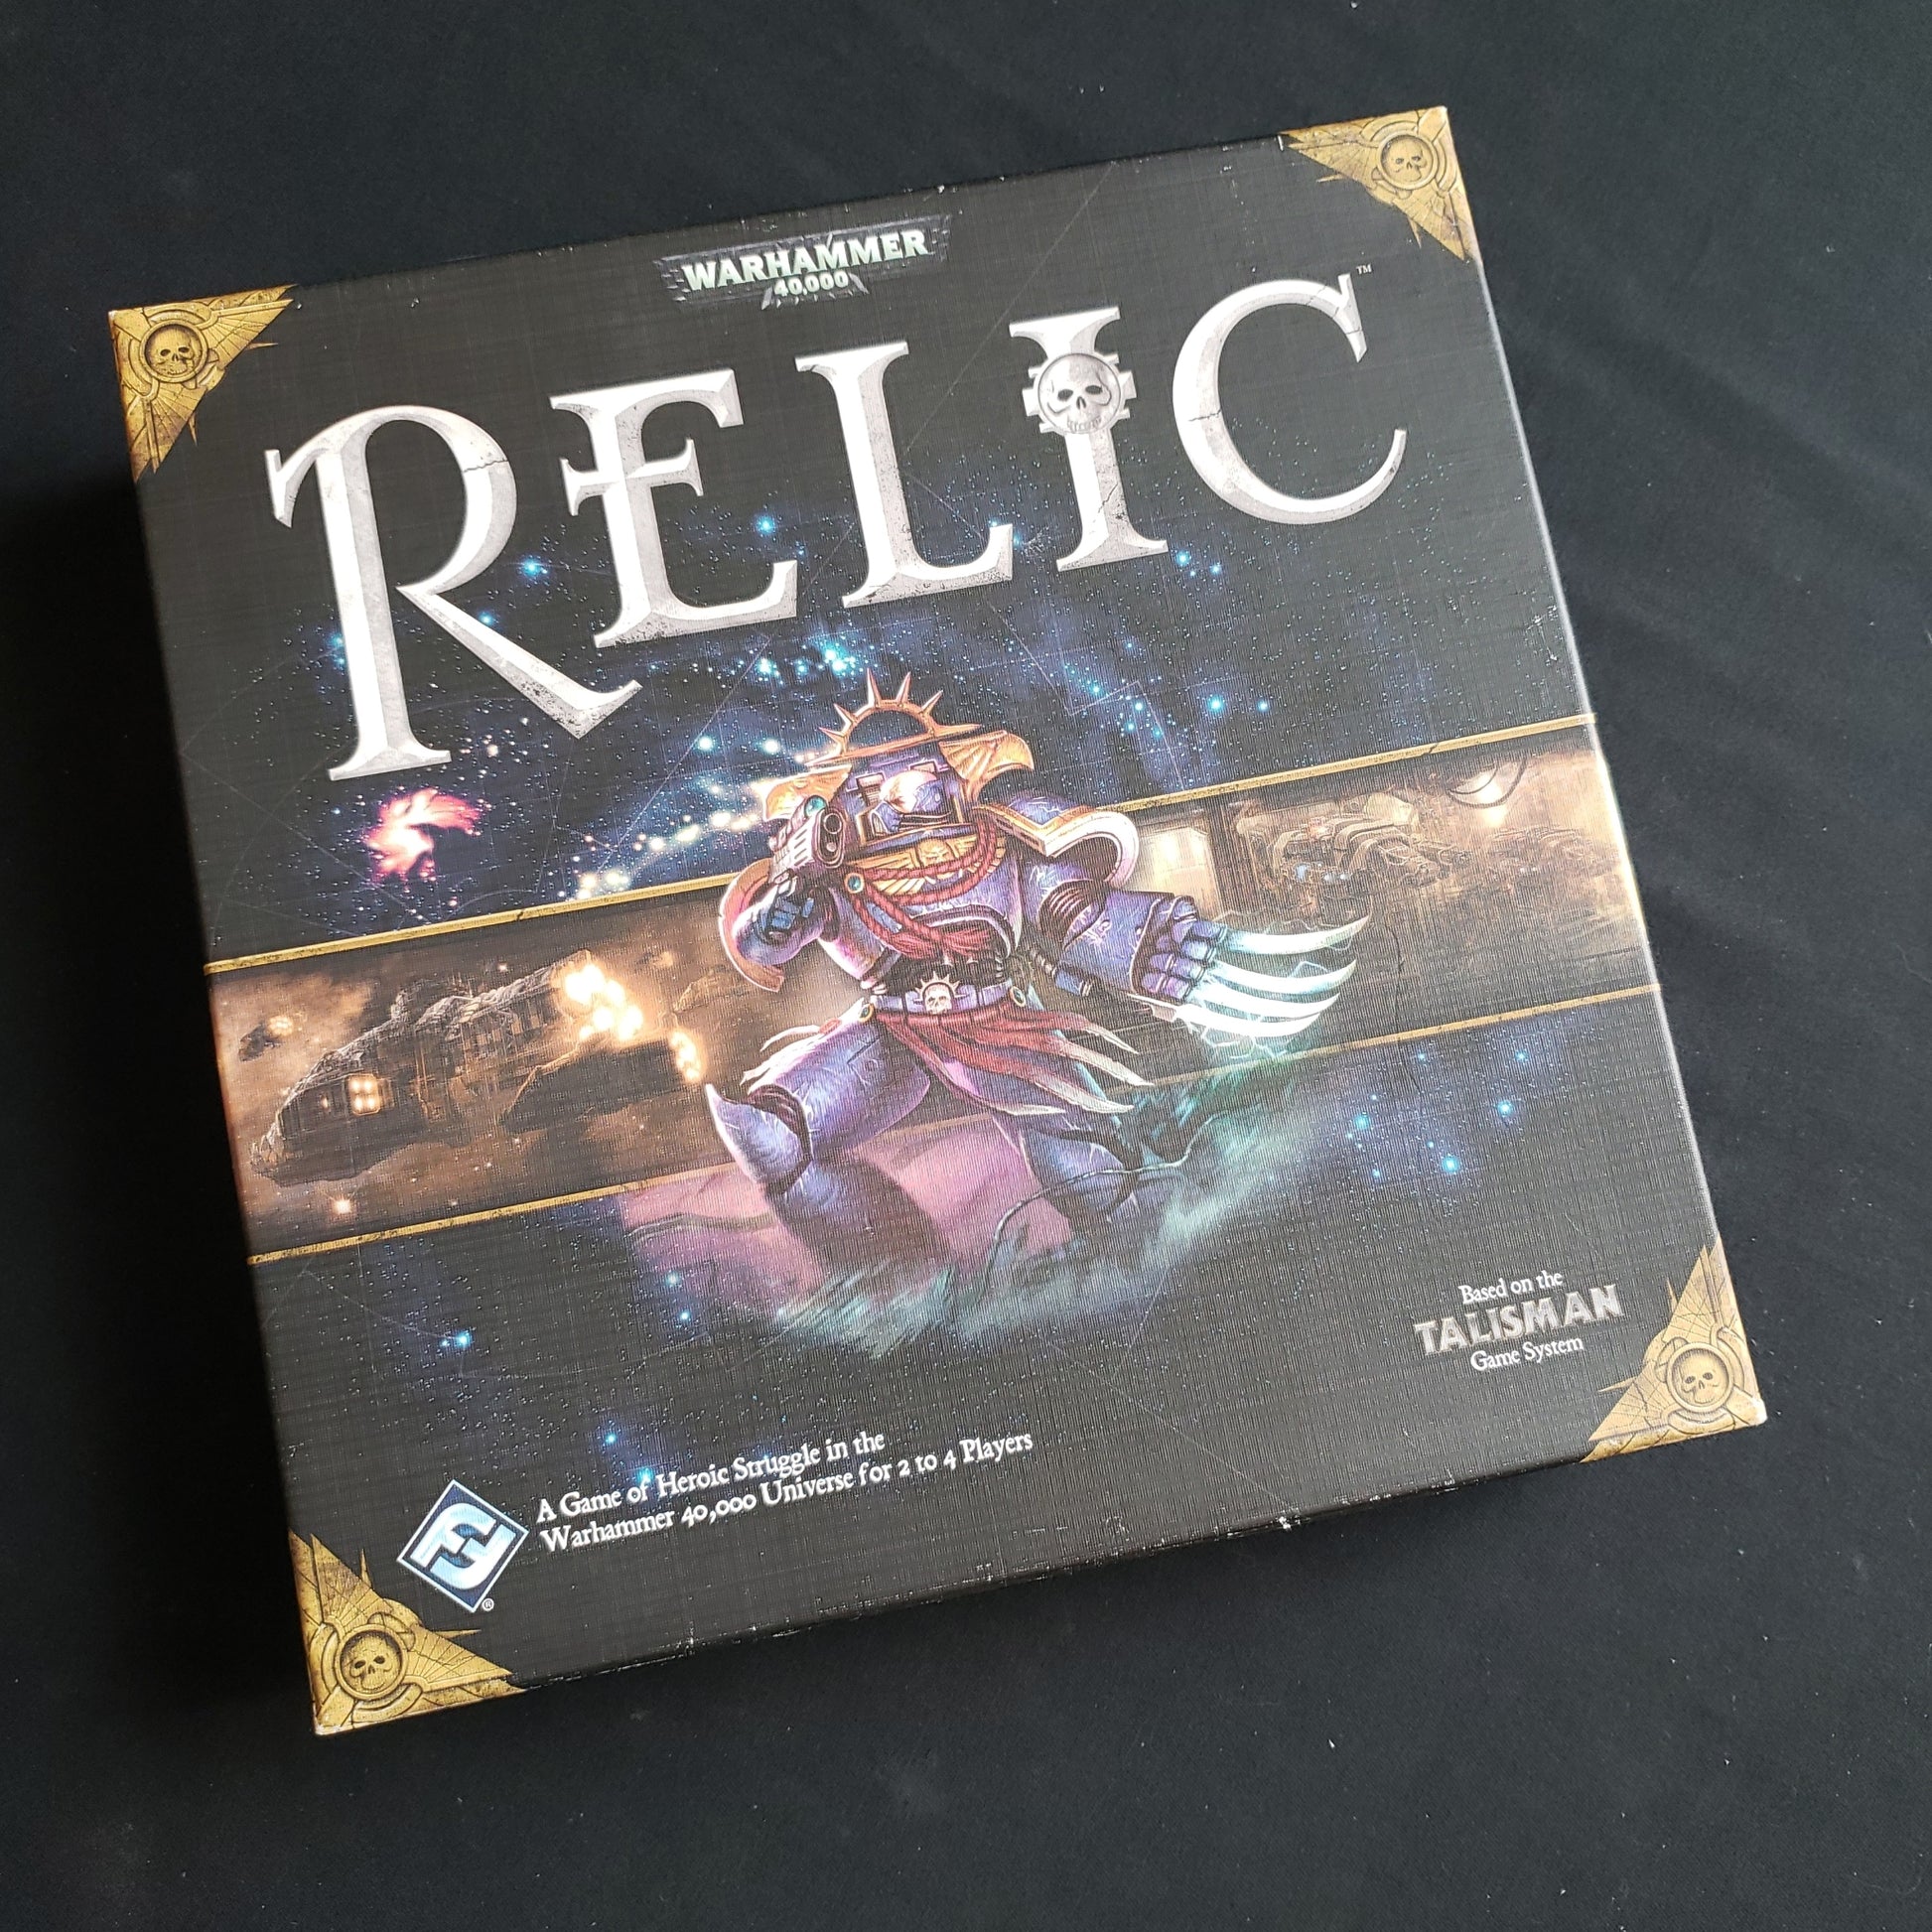 Image shows the front cover of the box of the Relic board game